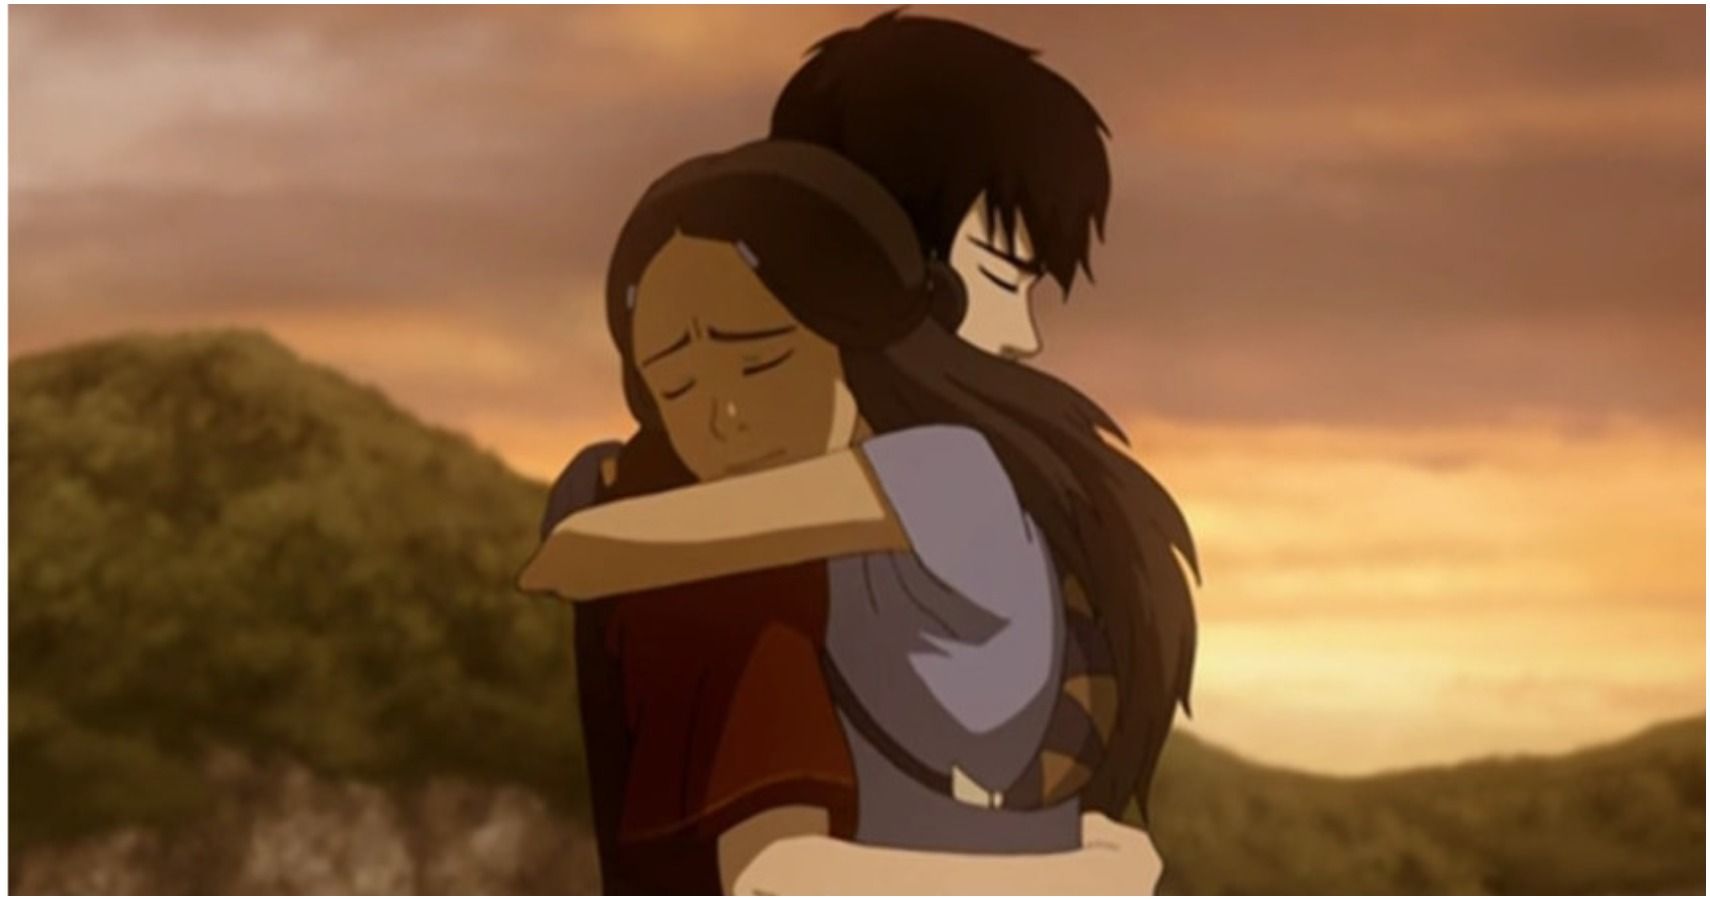 Why Didnt Zuko And Katara Get Together And 9 More Details About Their